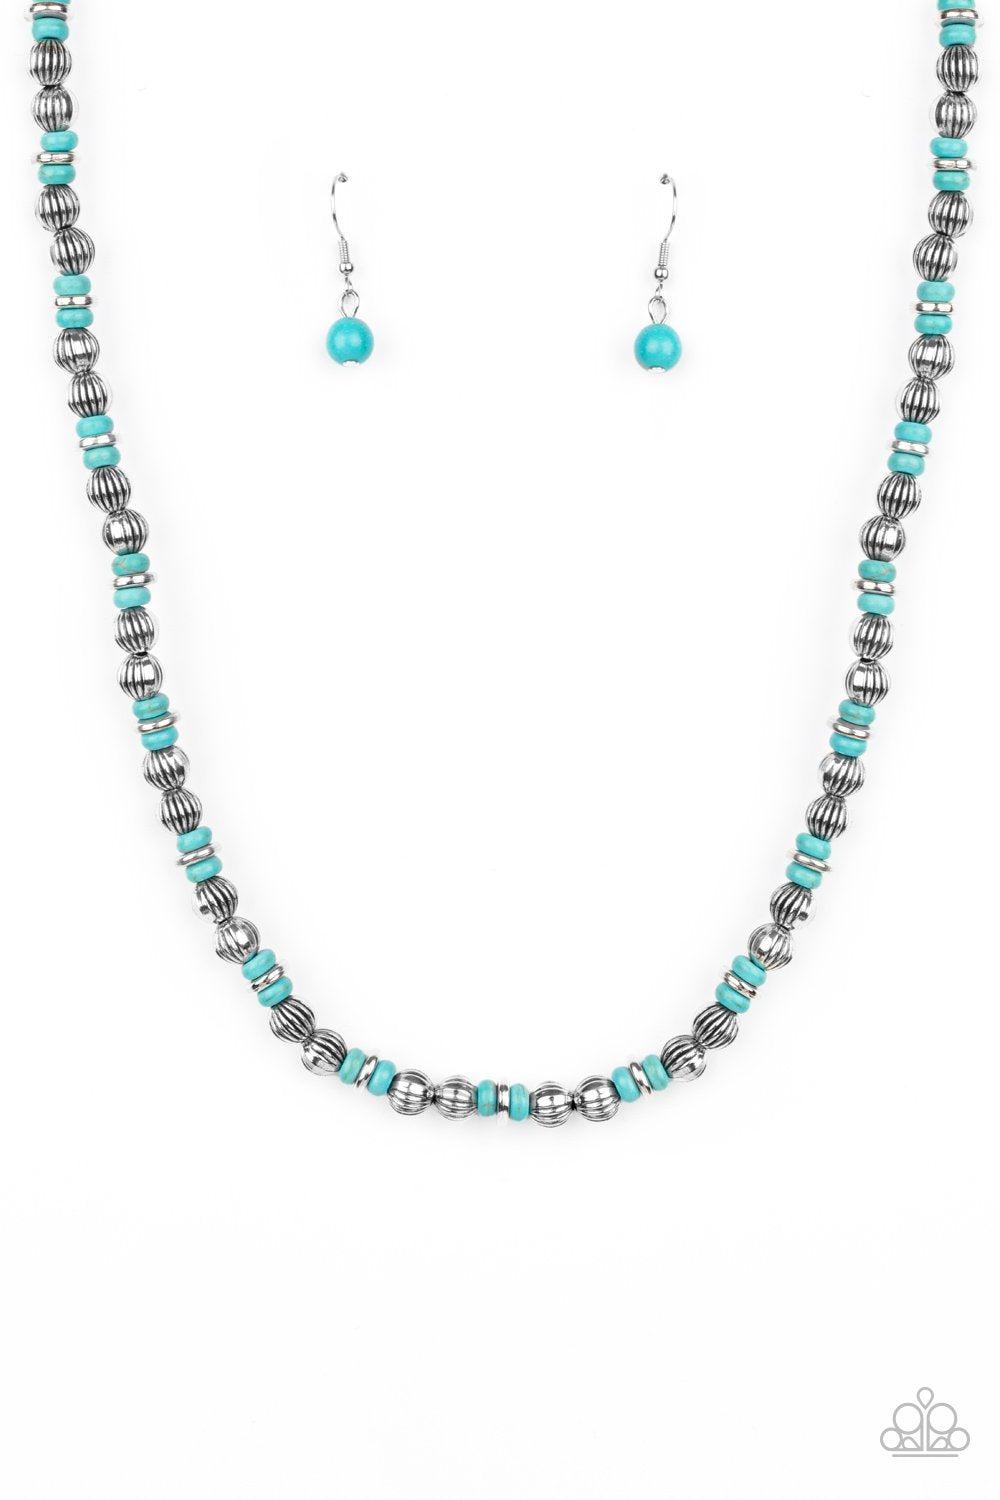 ZEN You Least Expect It Turquoise Blue Stone and Silver Necklace - Paparazzi Accessories- lightbox - CarasShop.com - $5 Jewelry by Cara Jewels